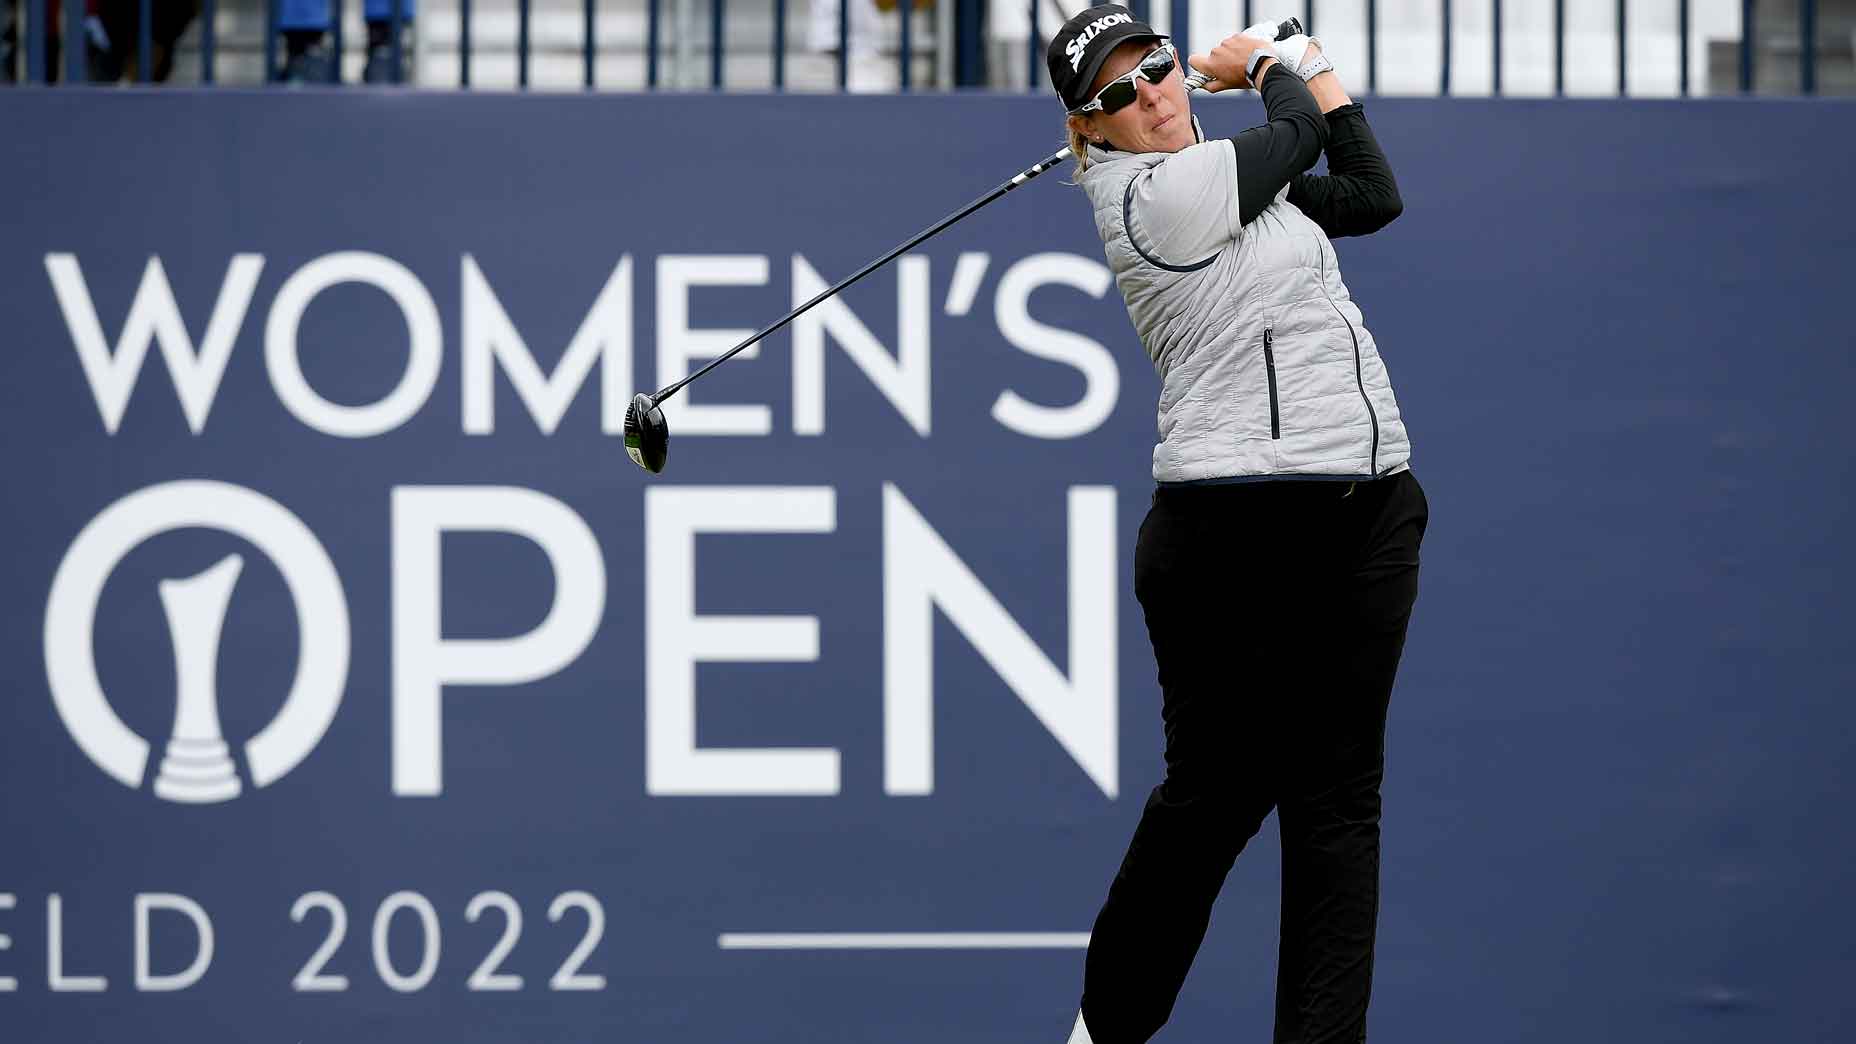 A near-perfect round at Muirfield, plus 2 other things to know from the AIG Women’s Open